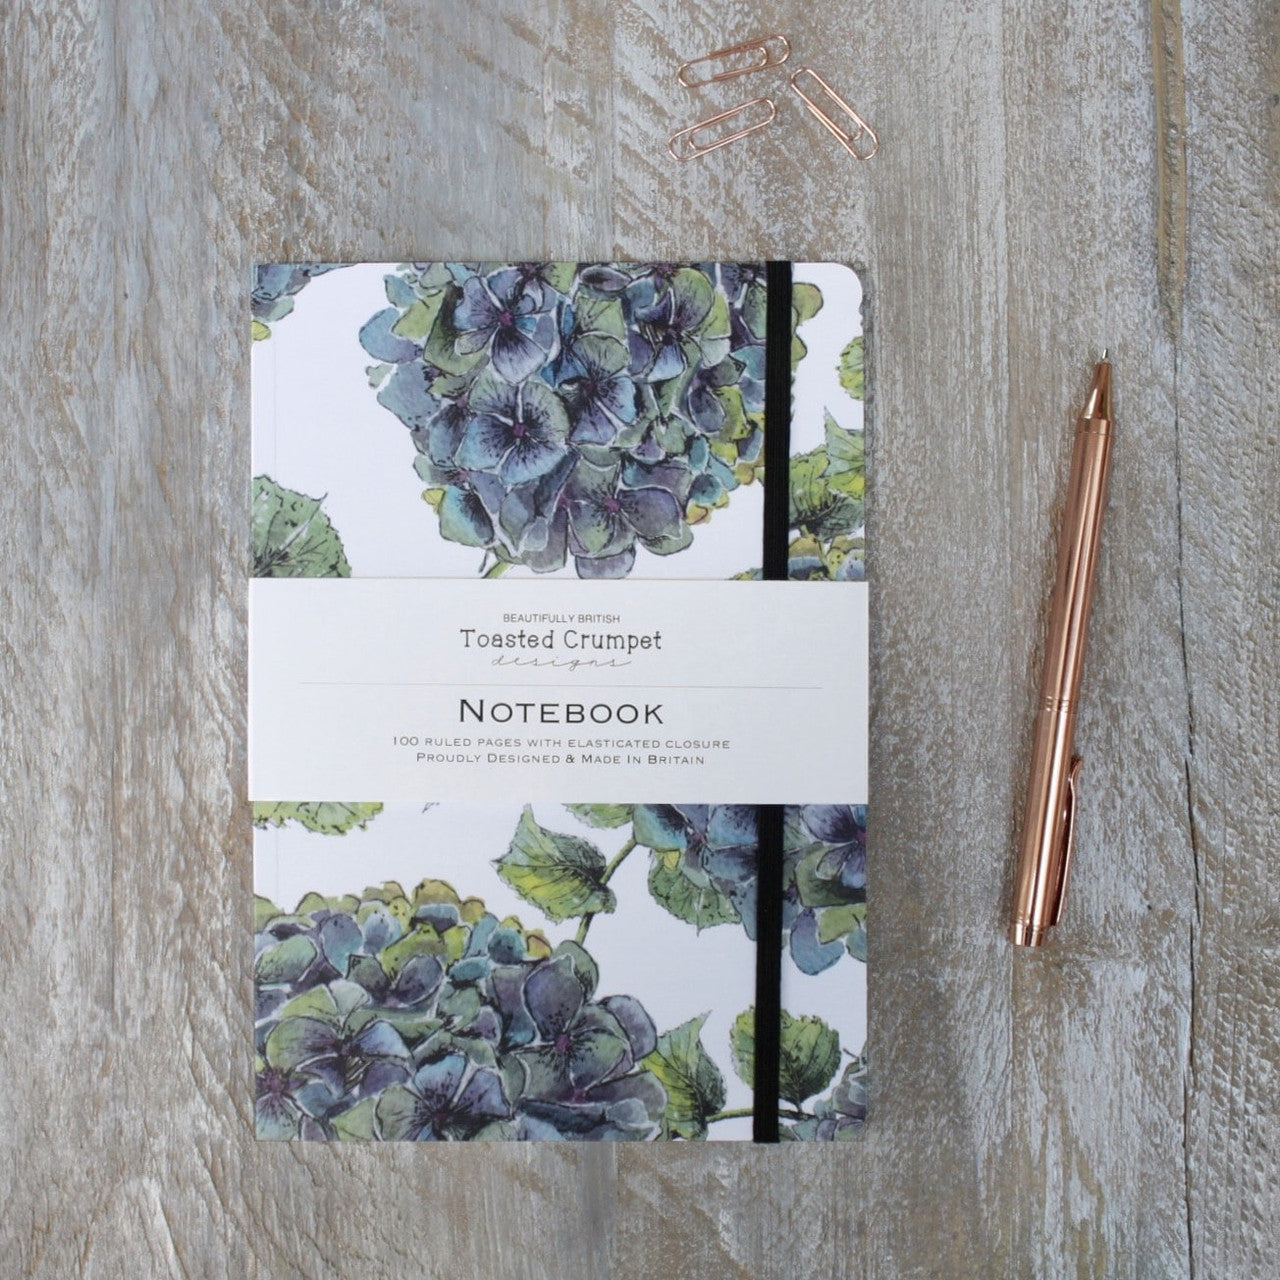 Hydrangea Pure A5 Lined Notebook by Toasted Crumpet.